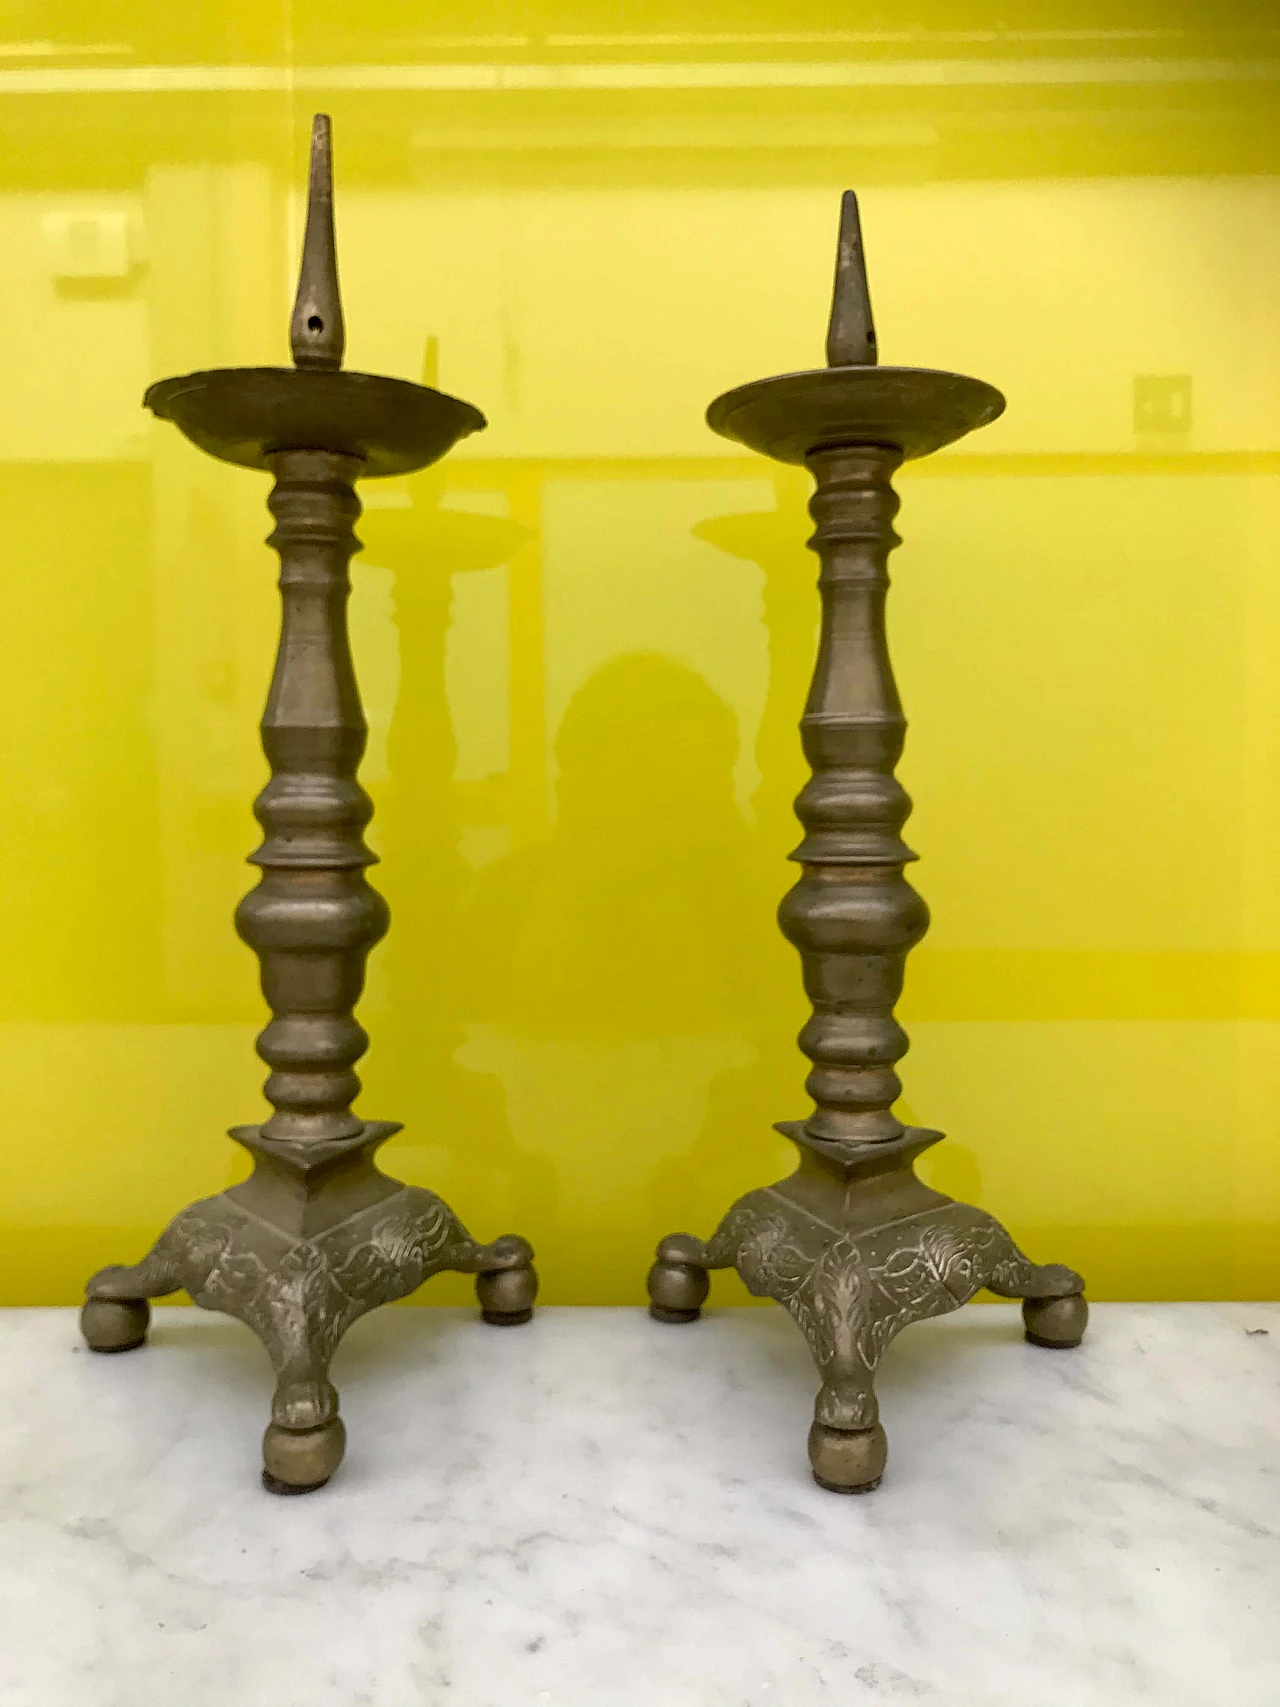 Pair of Italian candlesticks or torch holders in bronze, 17th century 1167797